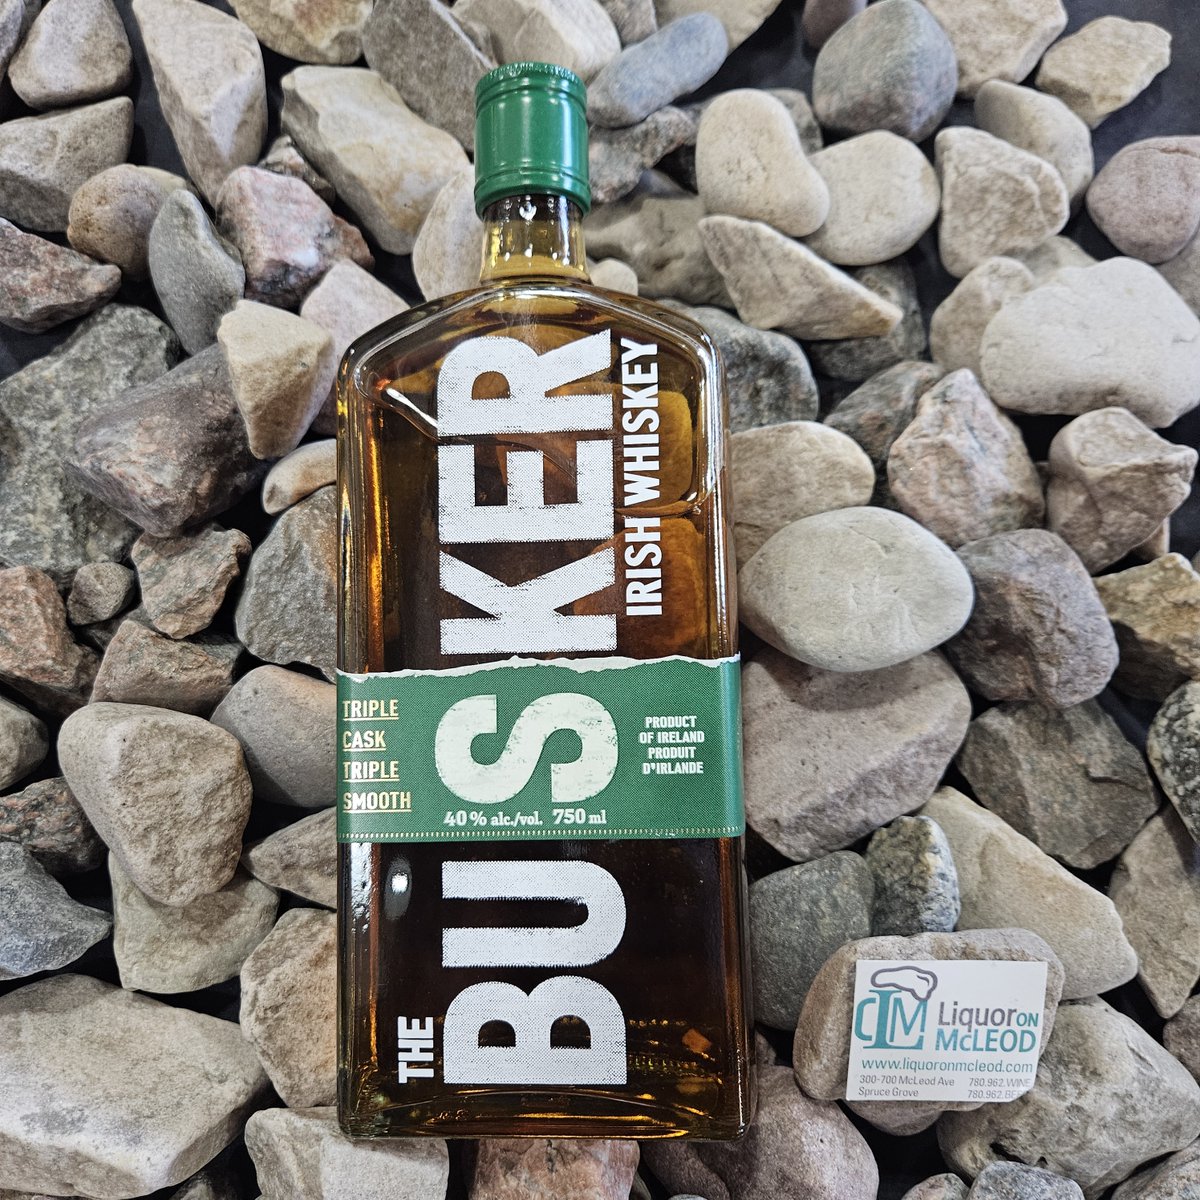 The Busker Triple Cask Irish Whiskey is filled with aromas of tropical fruits and vanilla leading to sweet malt flavors with dark chocolate, toffee, and cinnamon; well balanced with a sweet finish.

#whiskeyontherocks #thebusker #sprucegrove #stonyplain #liquoronmcleod